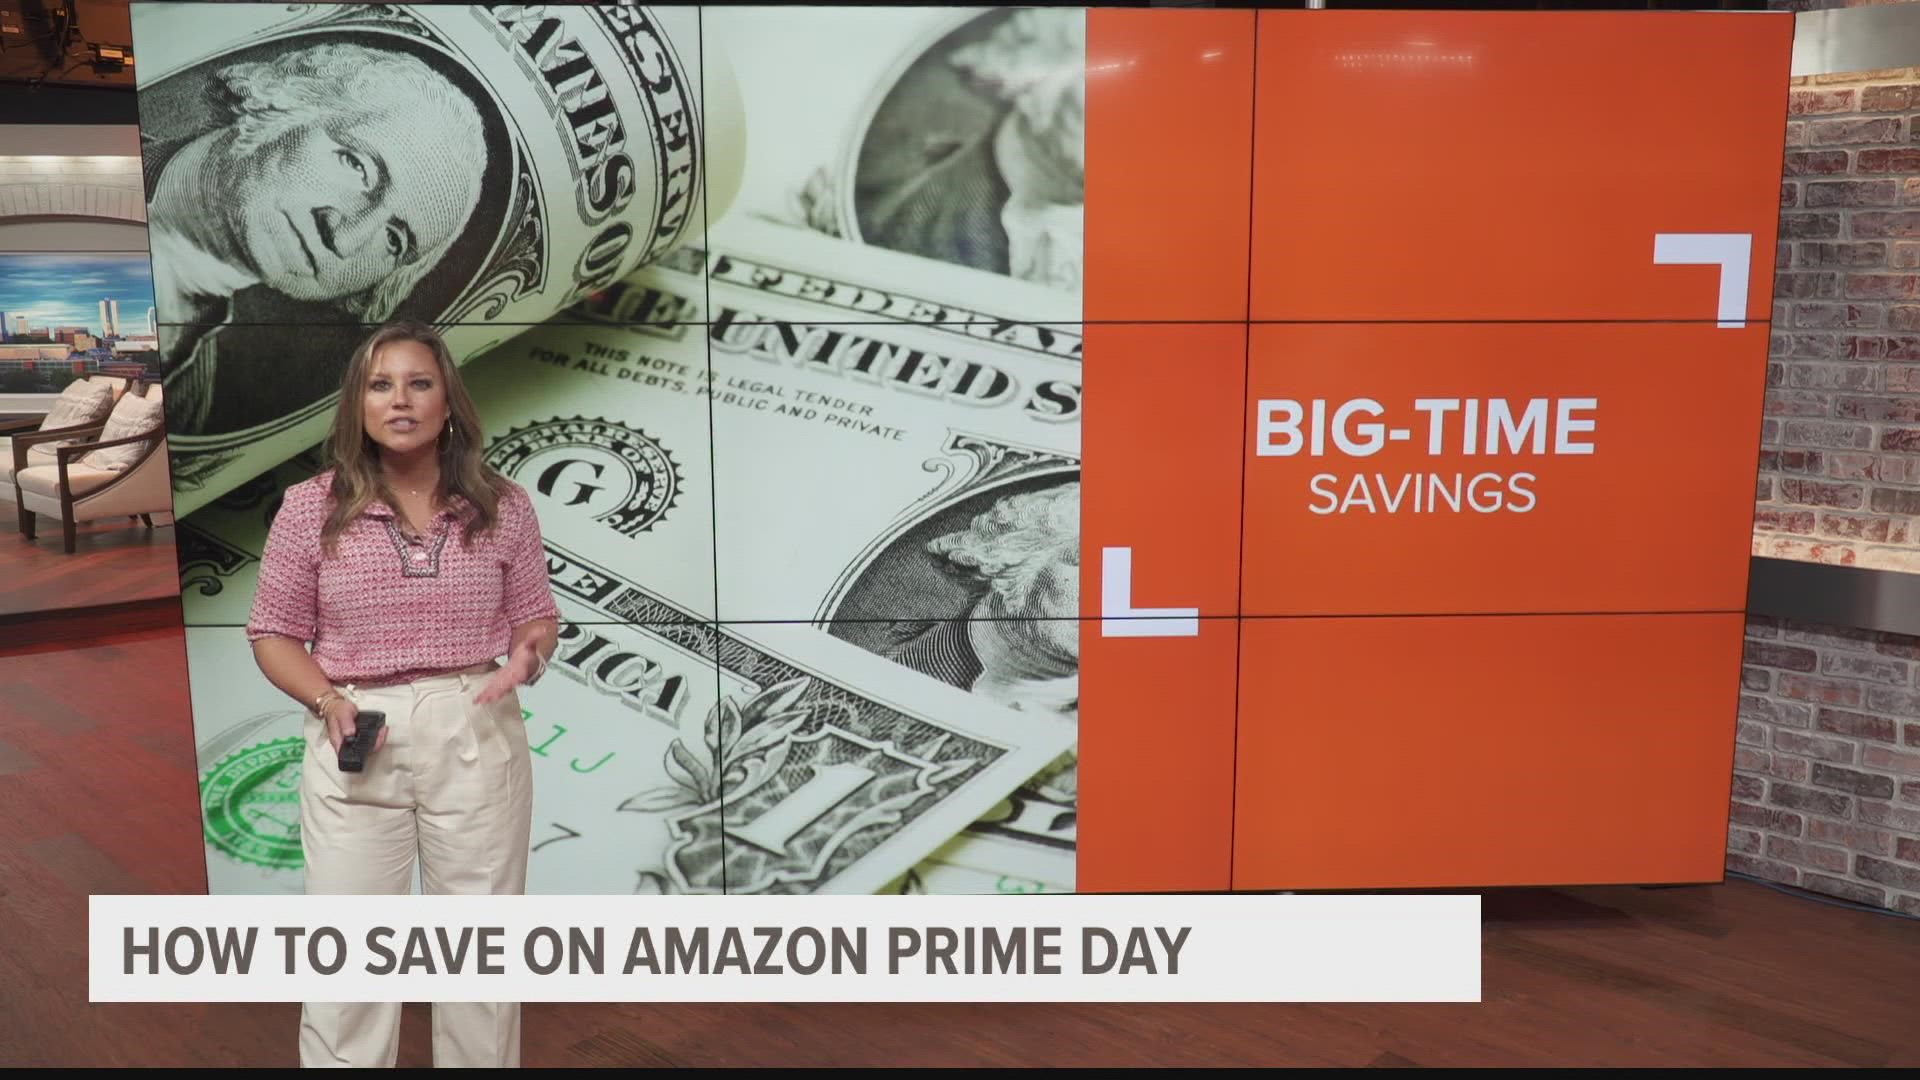 Here are some of the best deals on Amazon during Prime Day!